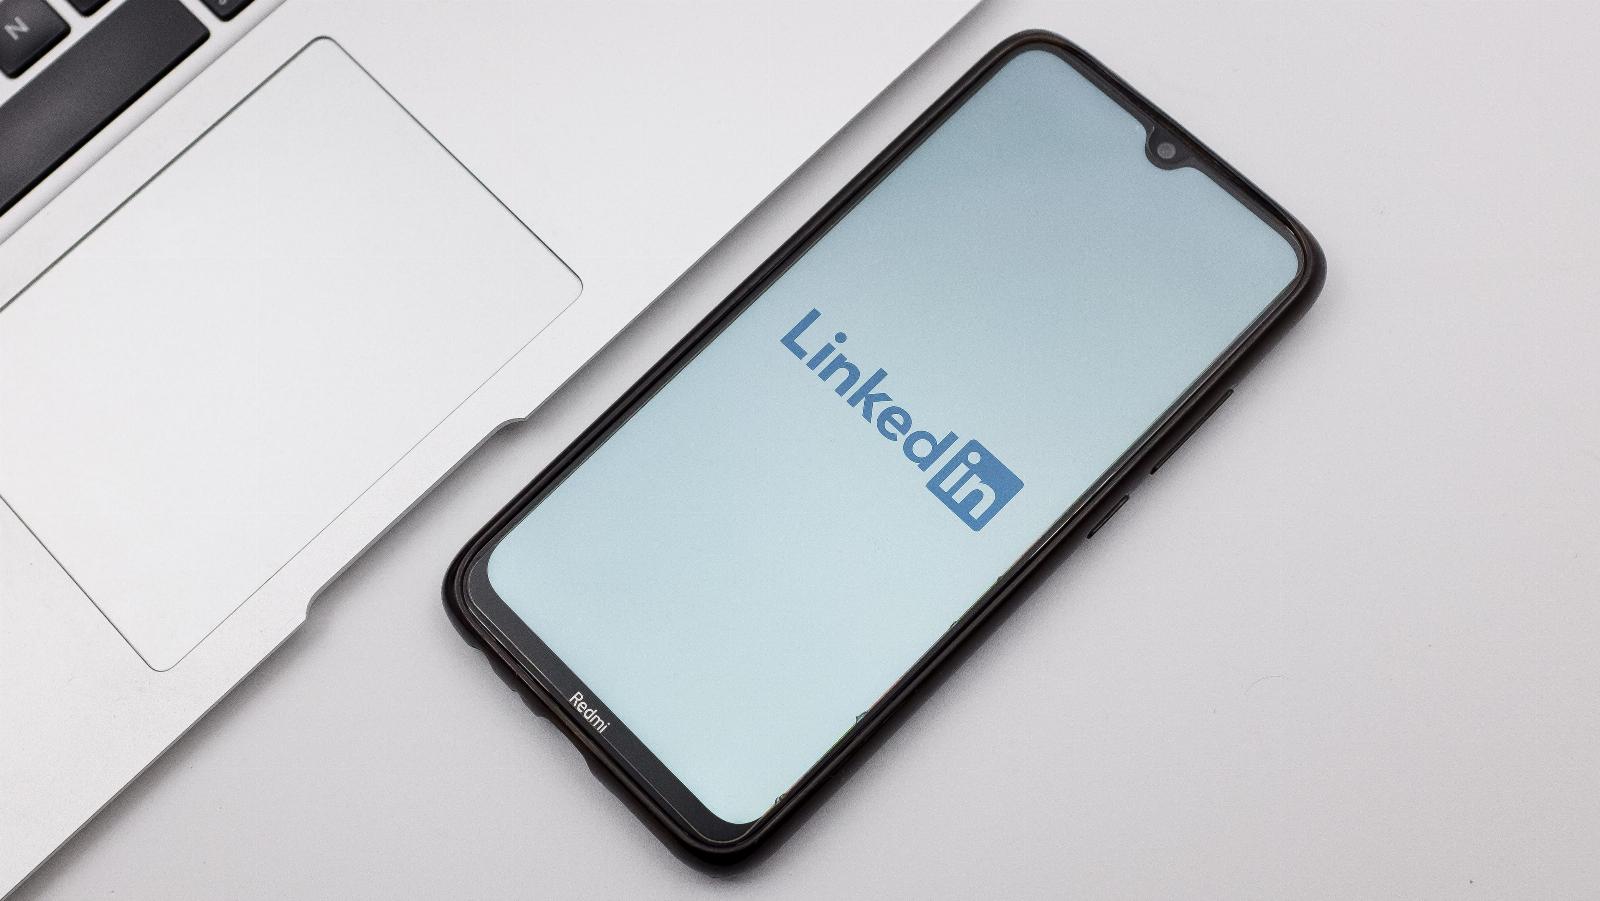 LinkedIn’s new feature nudges users to reach out to people in their network